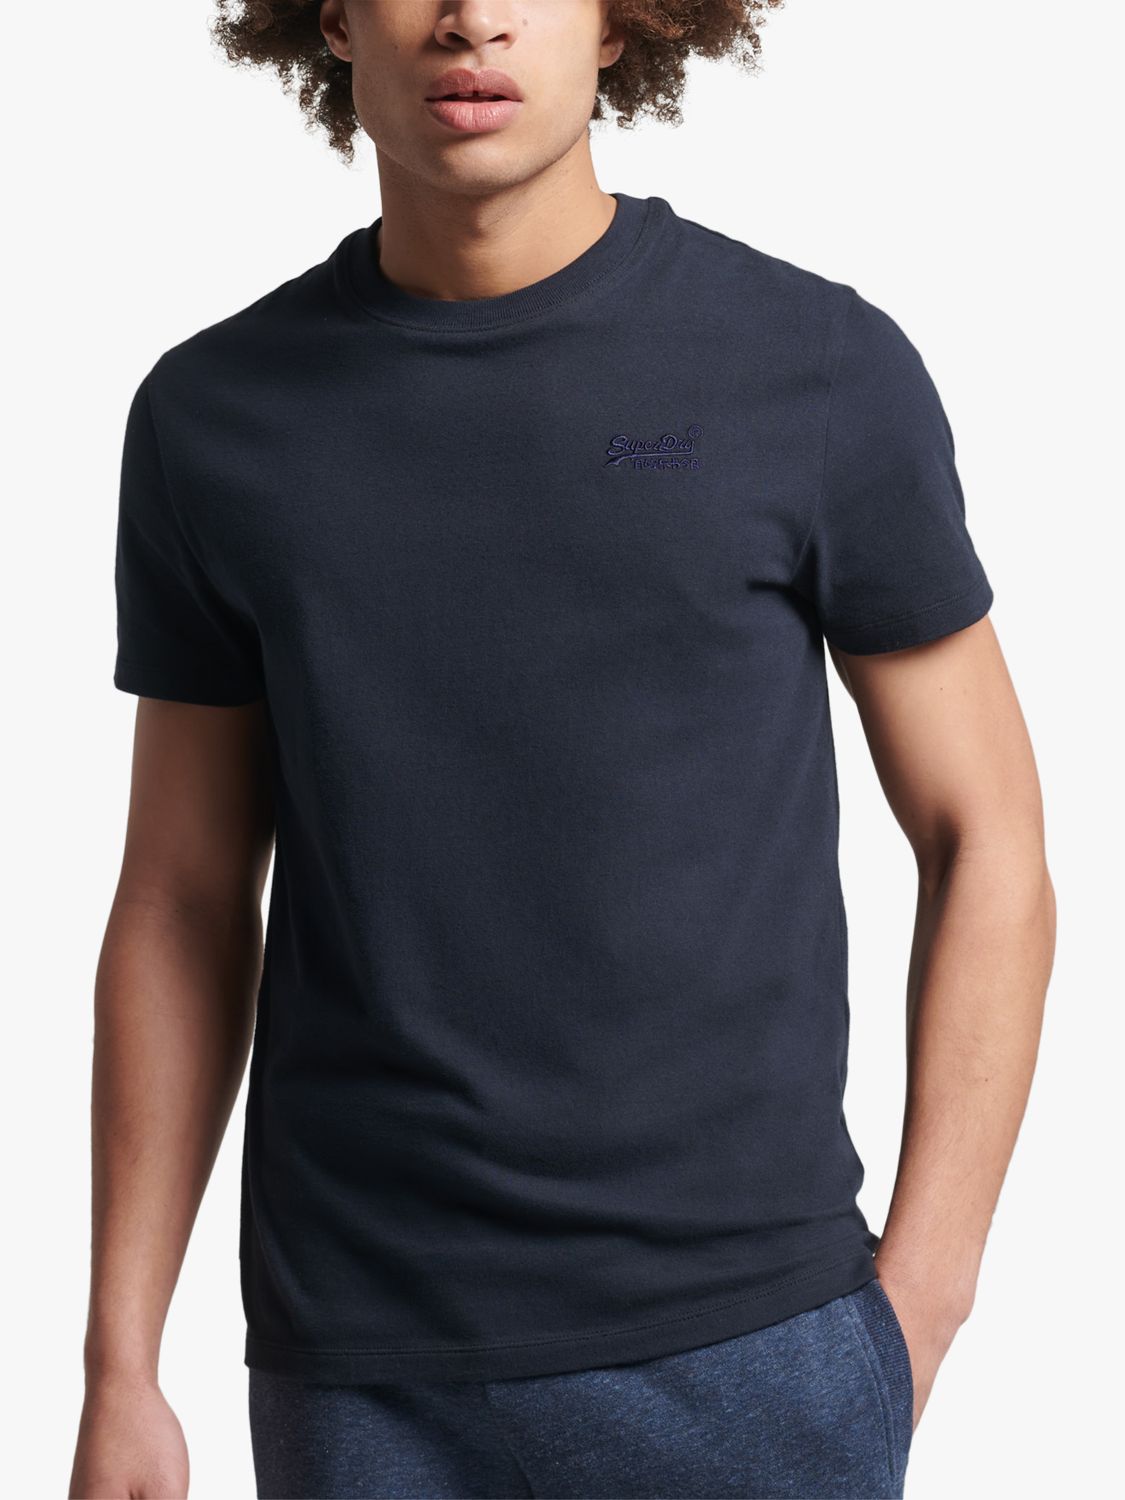 Superdry Organic Navy Embroidered John at T-Shirt, Partners Cotton Eclipse Lewis Logo & Vintage